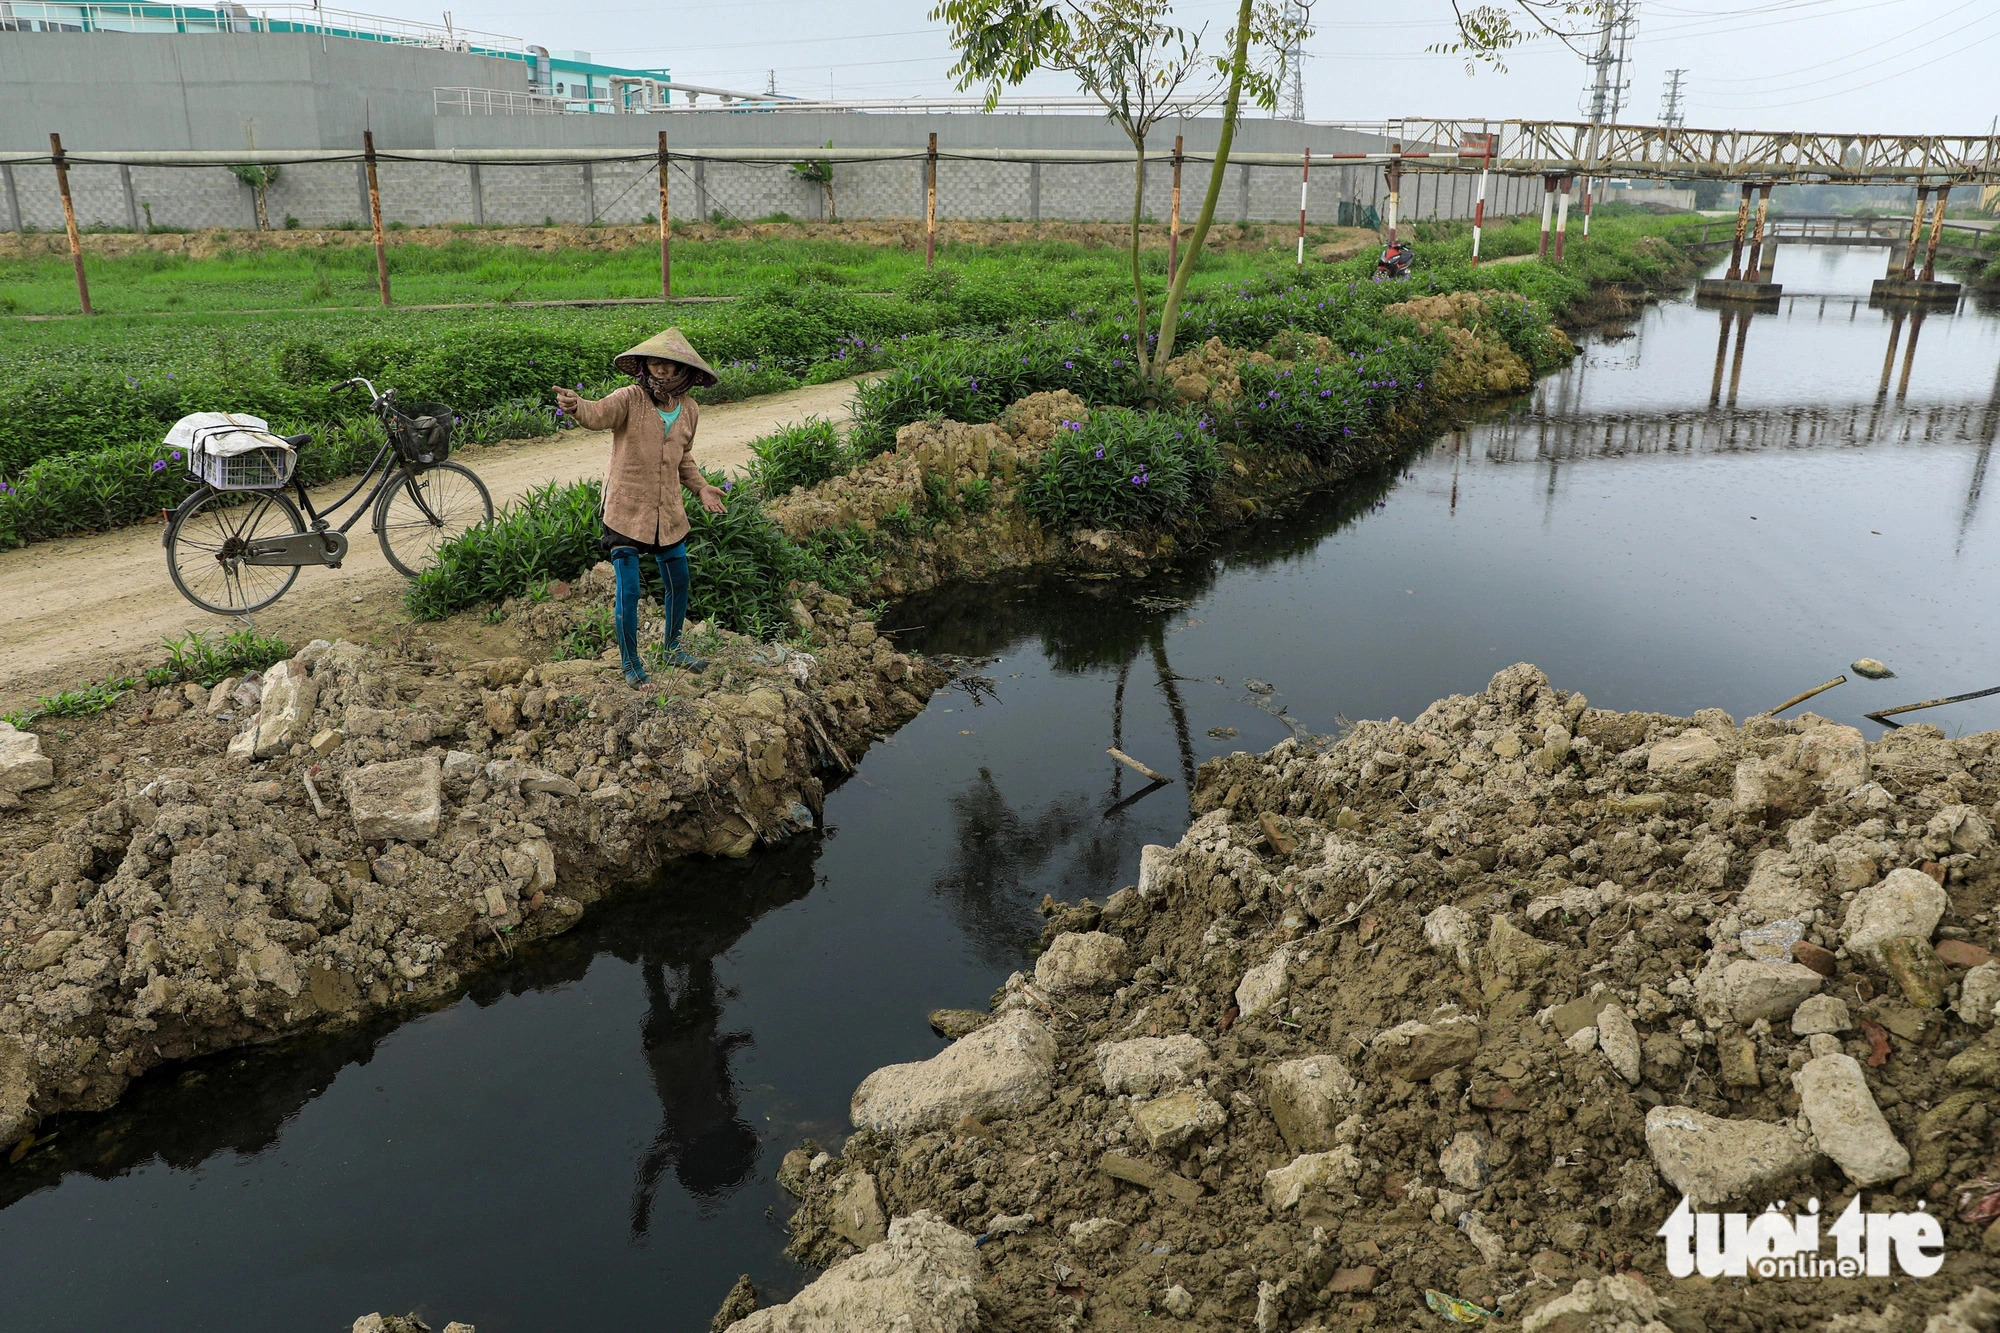 The wastewater channel has wreaked havoc on the lives and livelihoods of local inhabitants. Photo: Tuoi Tre